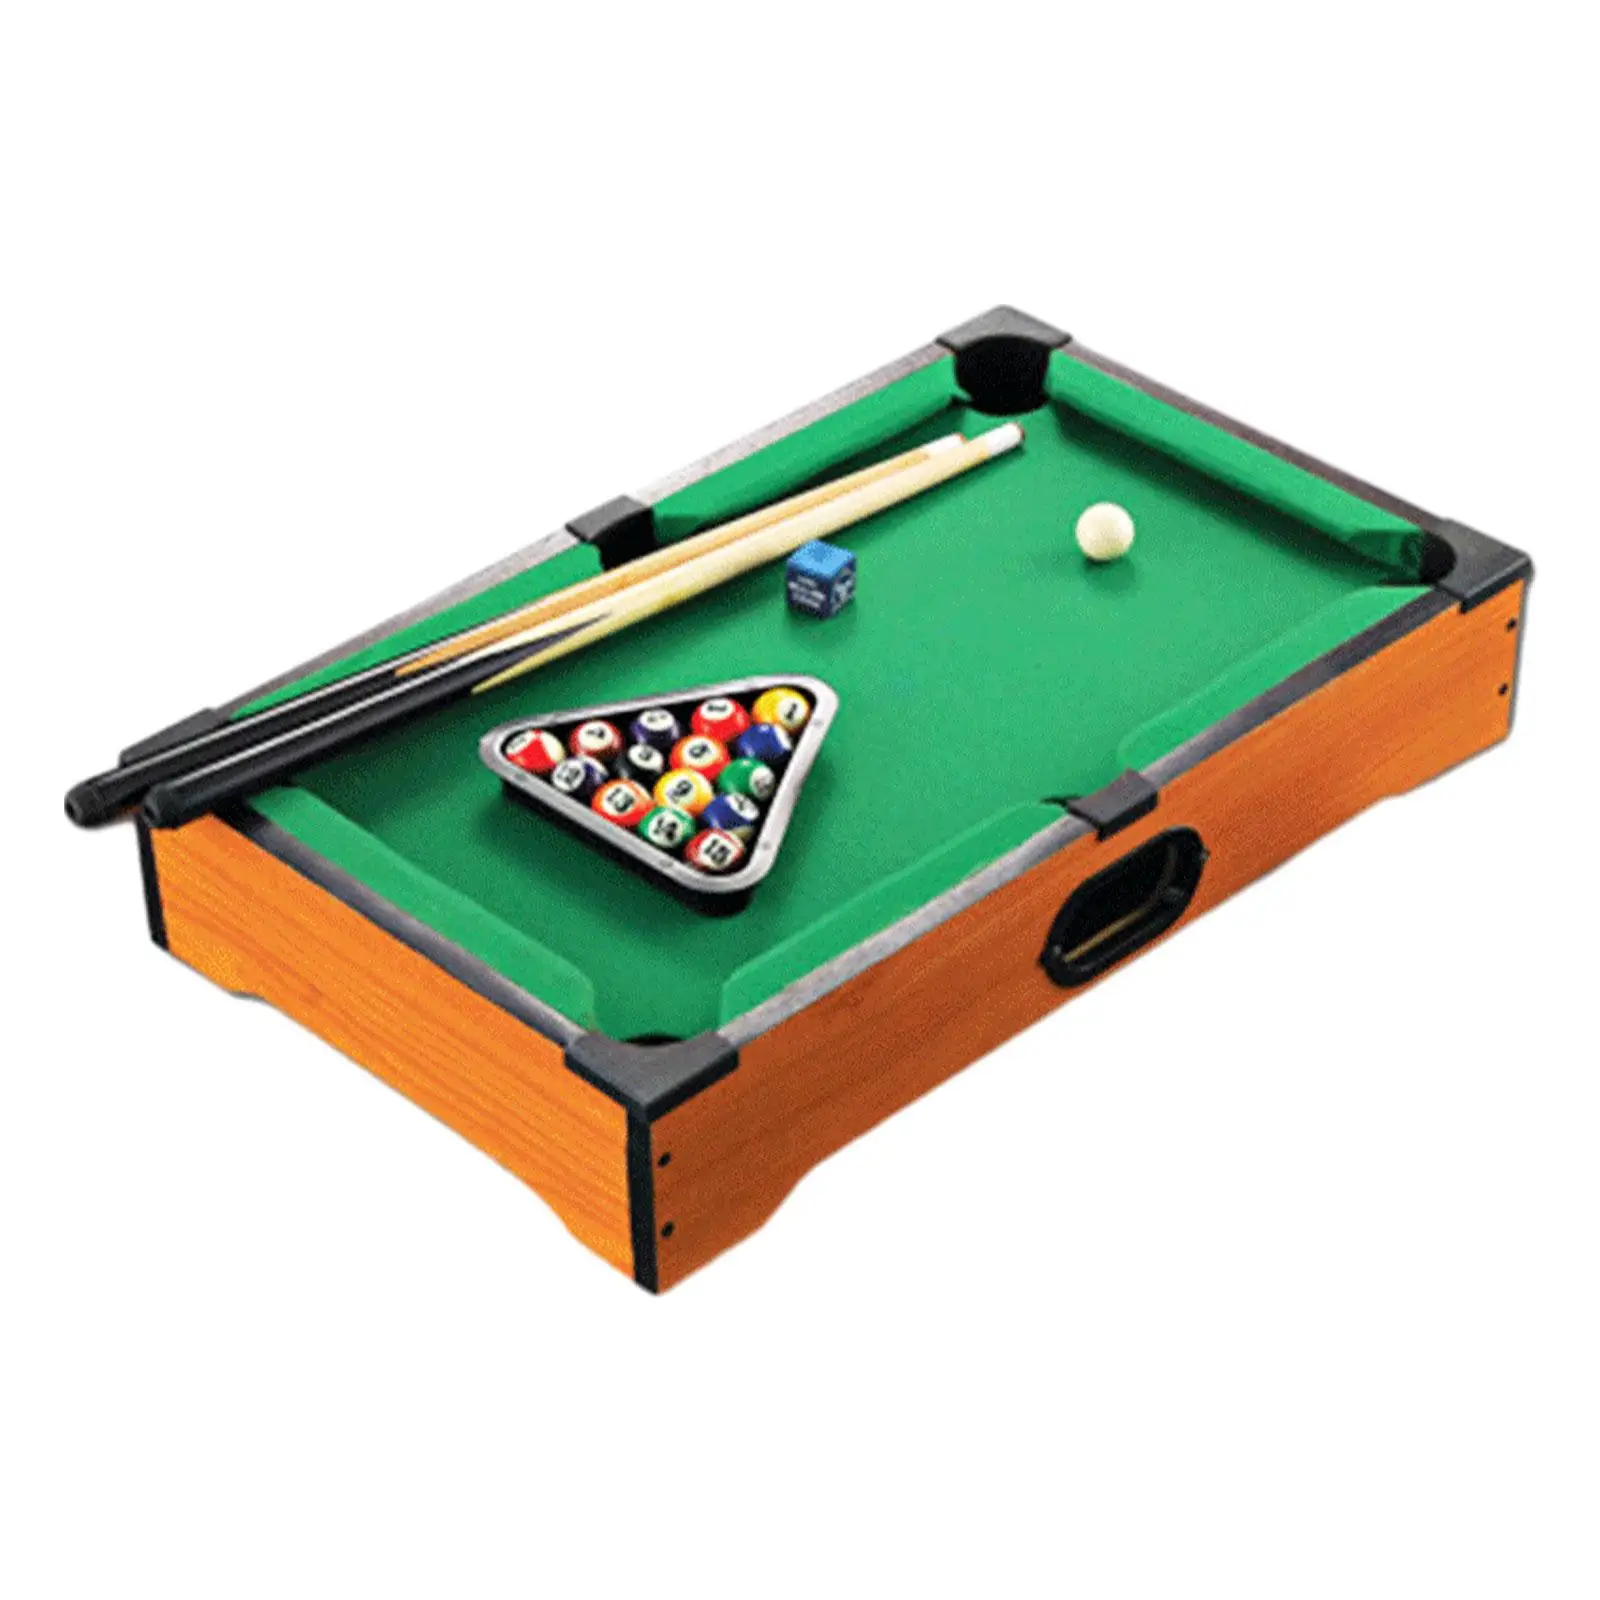 Mini Tabletop Pool Set Eye Hand Coordination Home Play Cues Snooker Billiards Toy Wooden for Playroom Travel Office Party Family